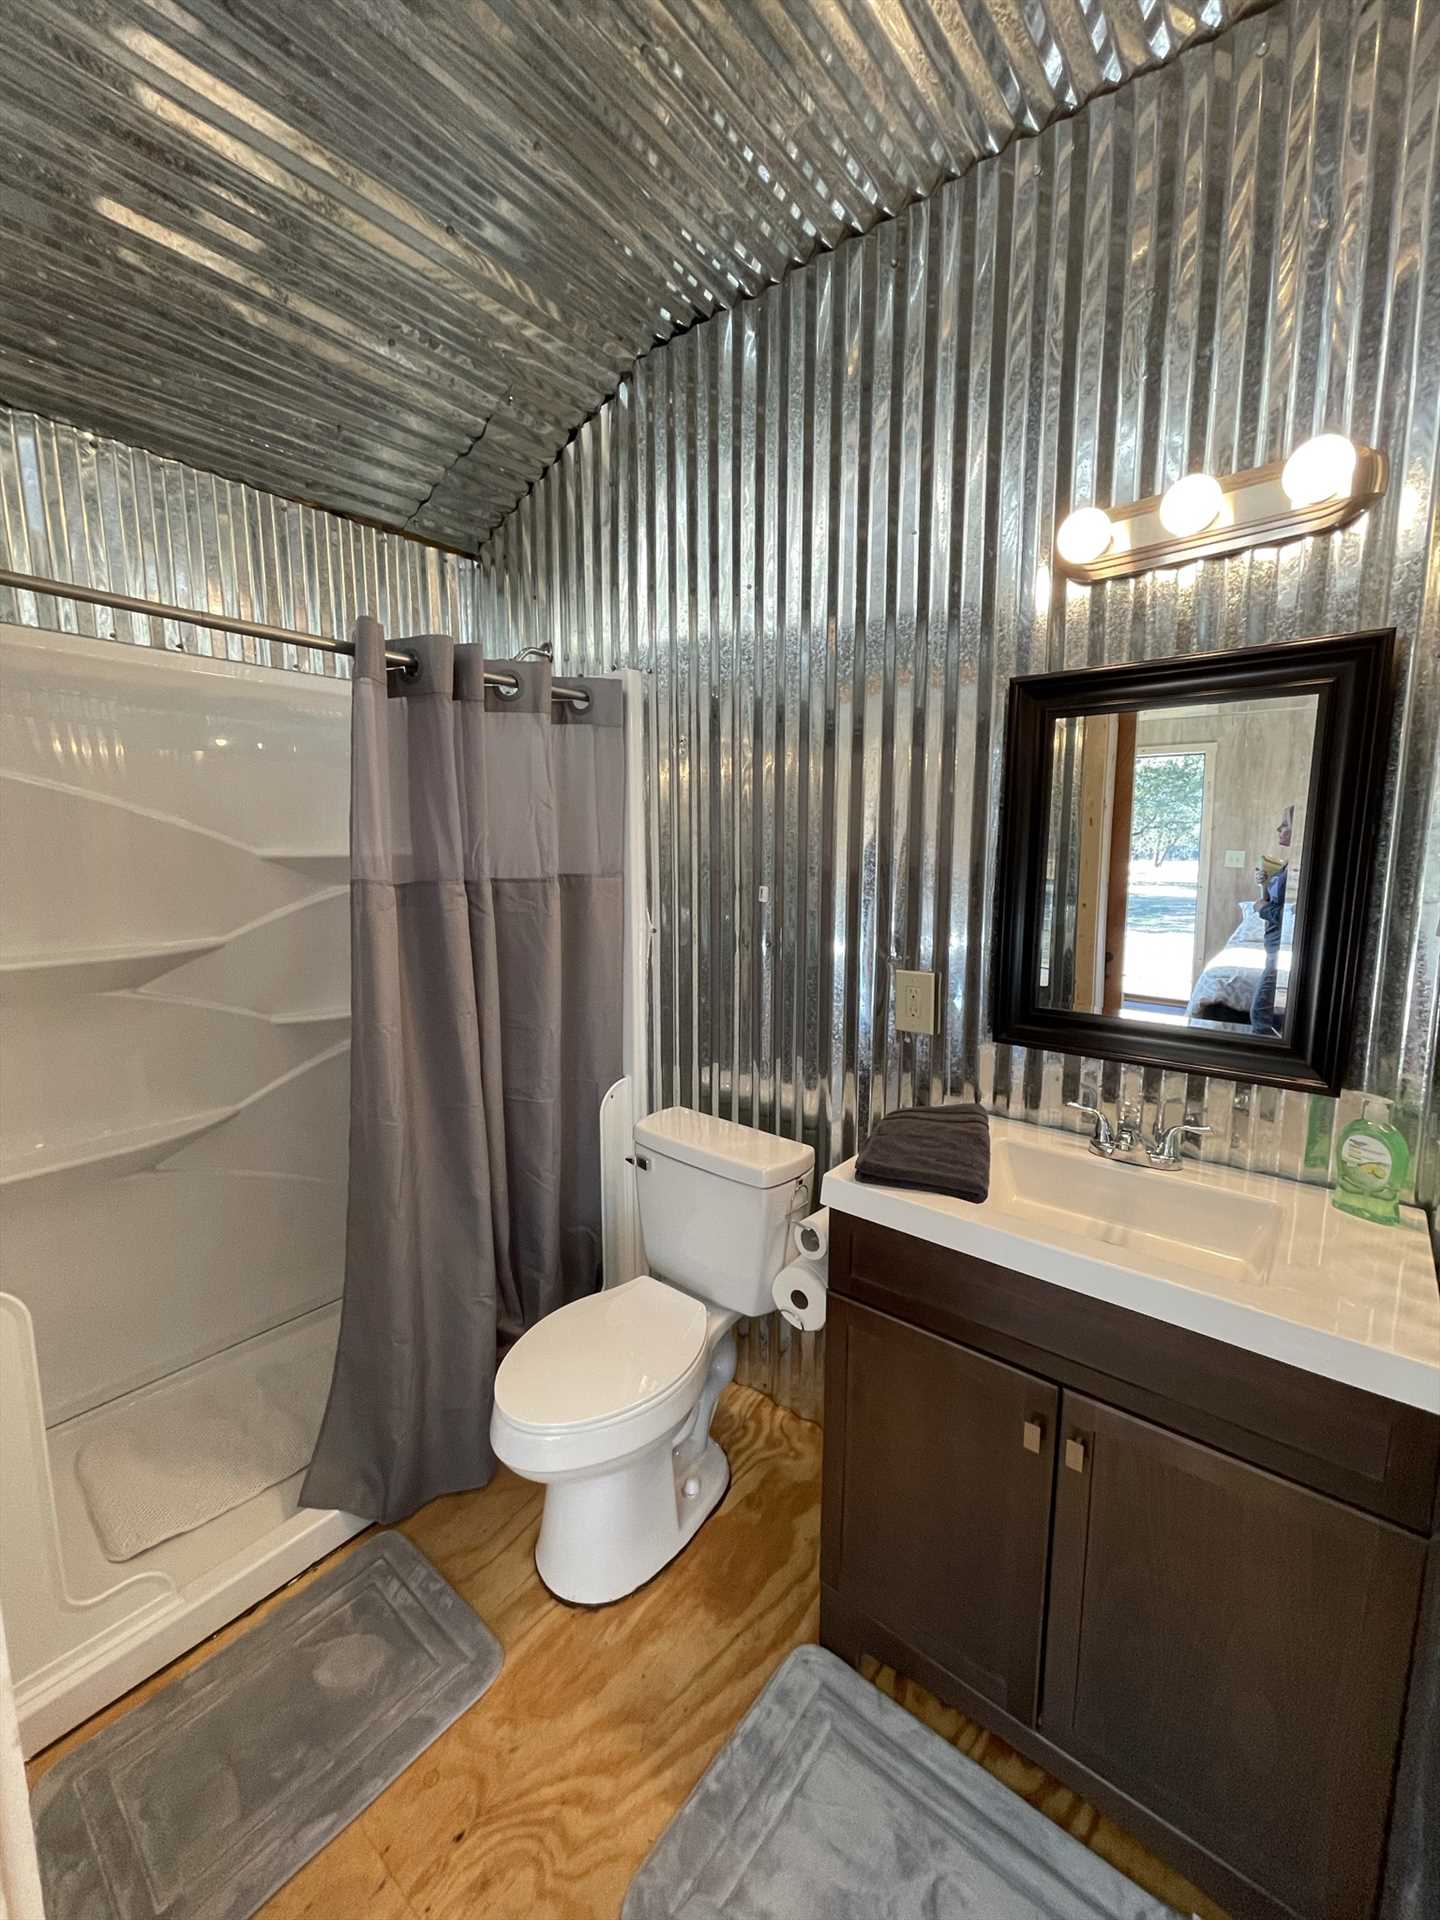                                                 There's a roomy shower in the full bath here, and clean linens for both bed and bath are provided, too!